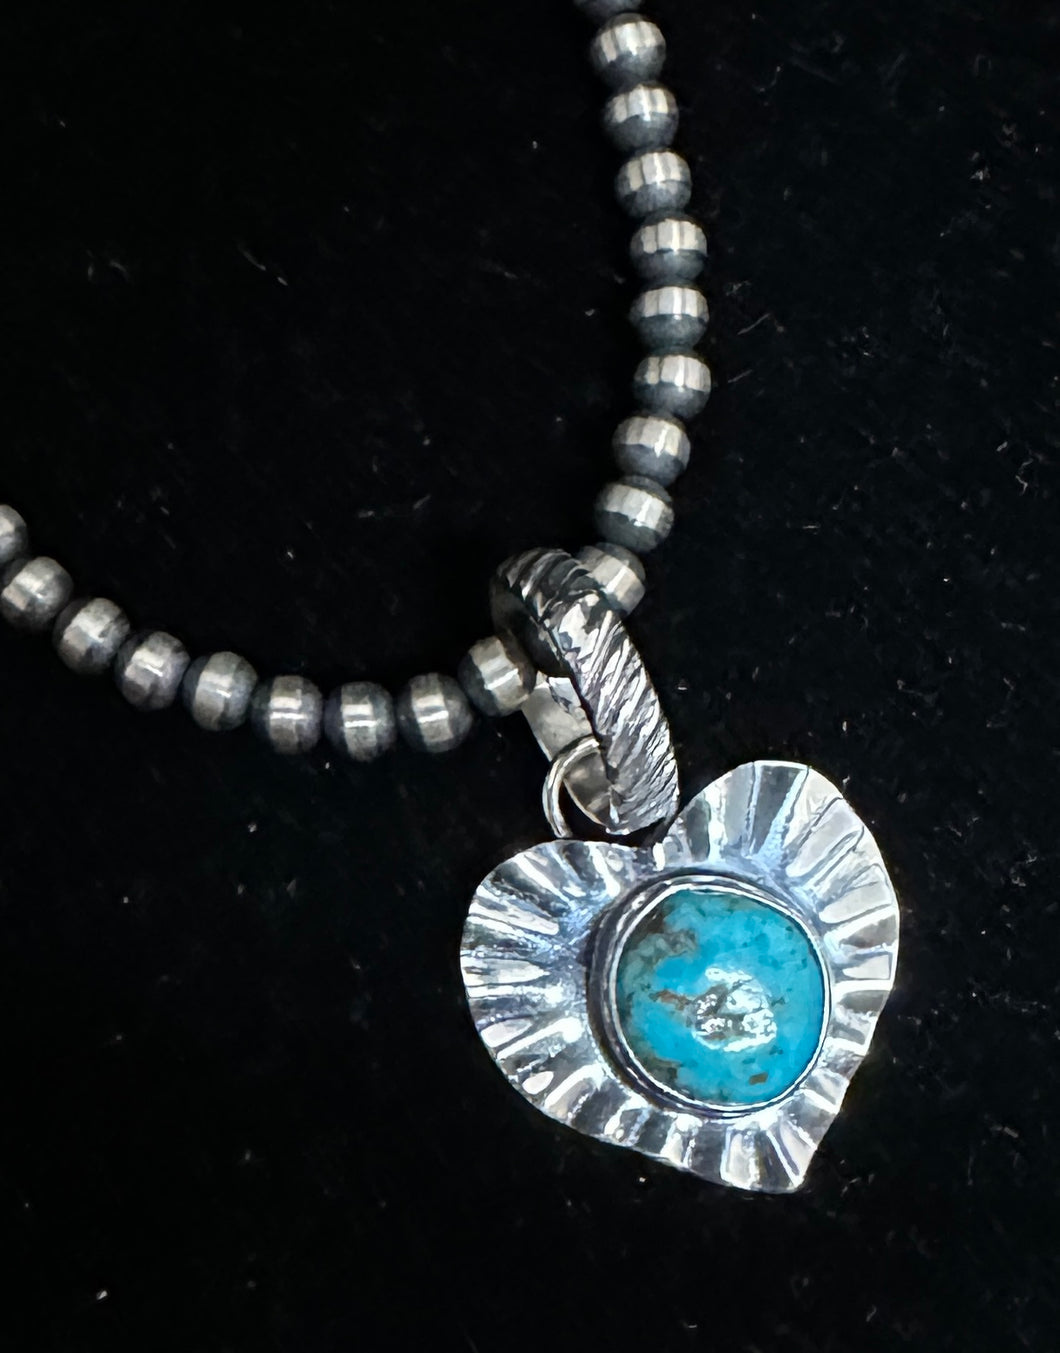 Turquoise Sterling Silver Heart Necklace Pendant